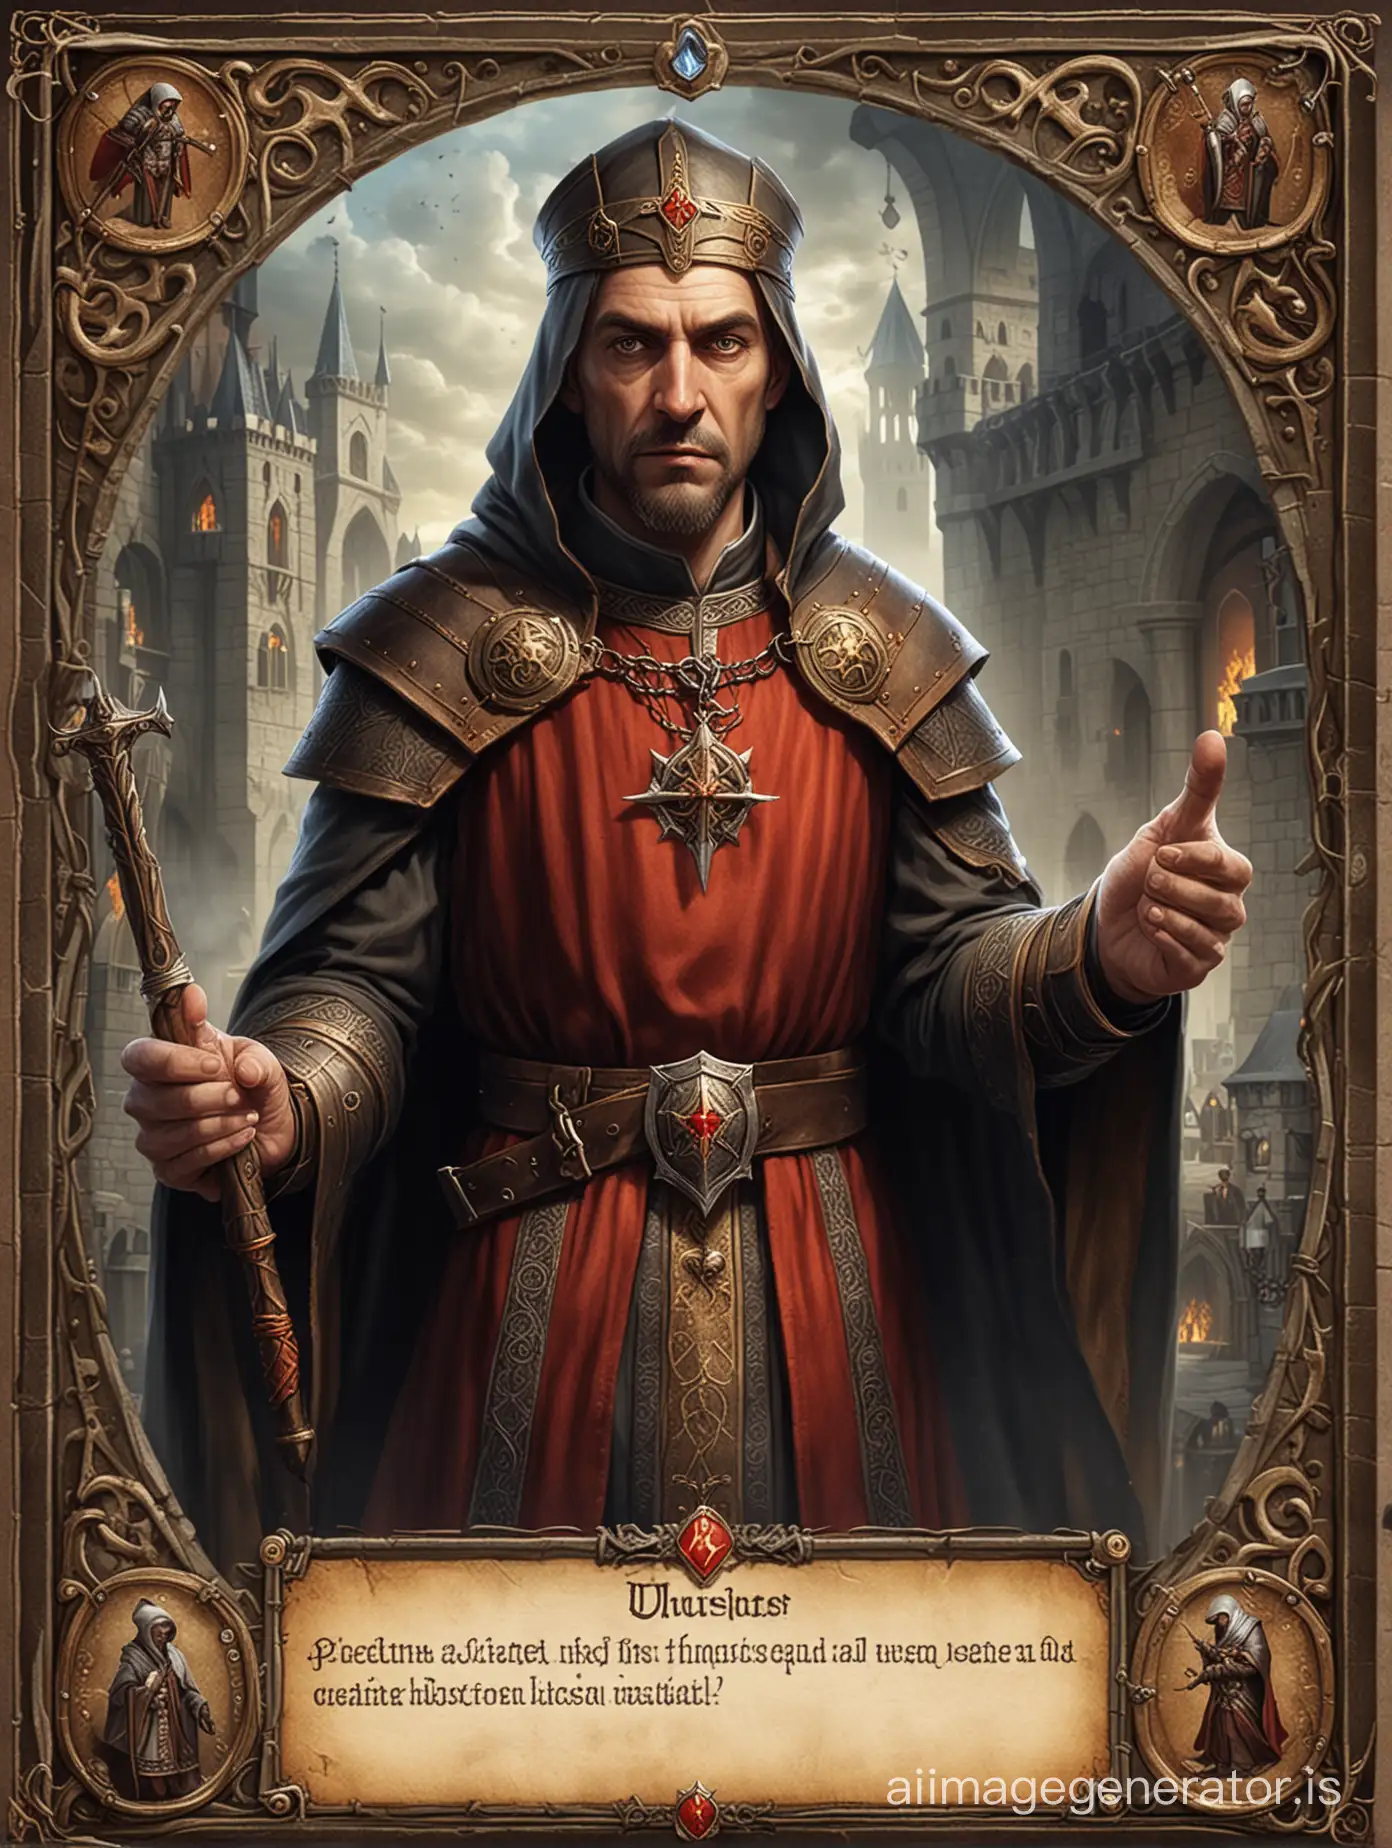 create a board game card representing an inquisitor priest in the Middle Ages